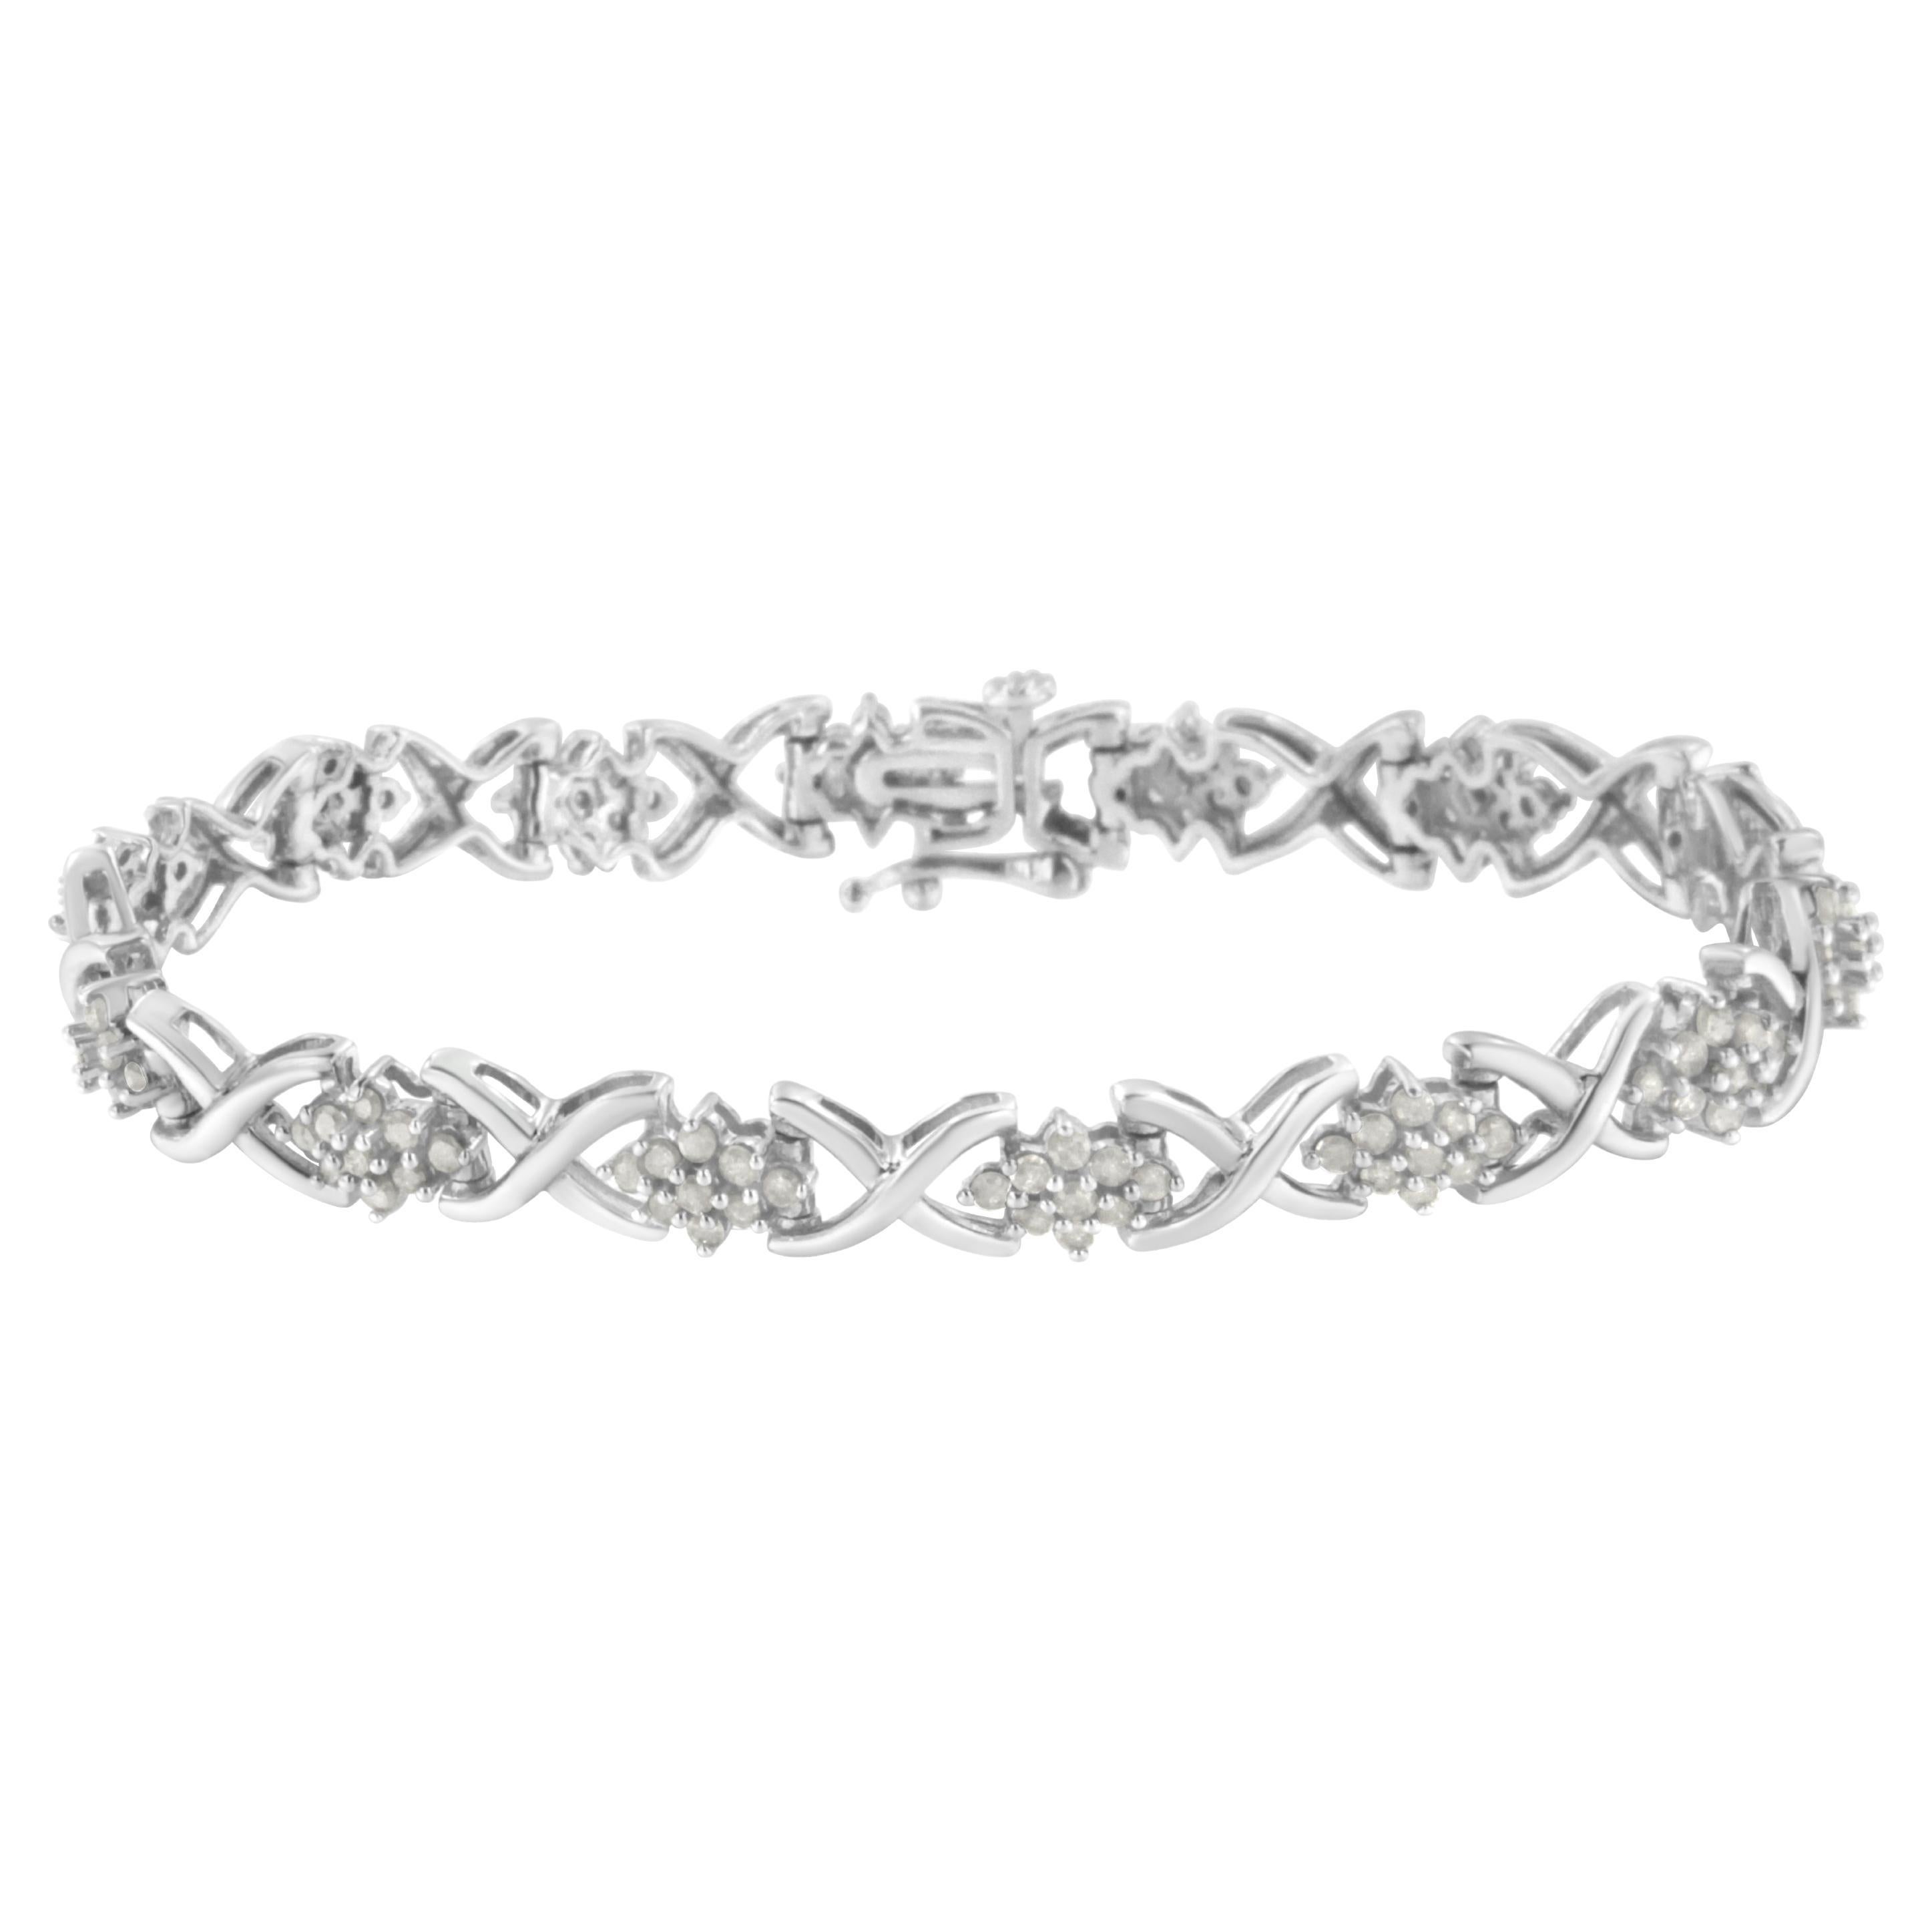 Exquisite 925 Sterling Silver Chanel Bracelet with Brilliant White